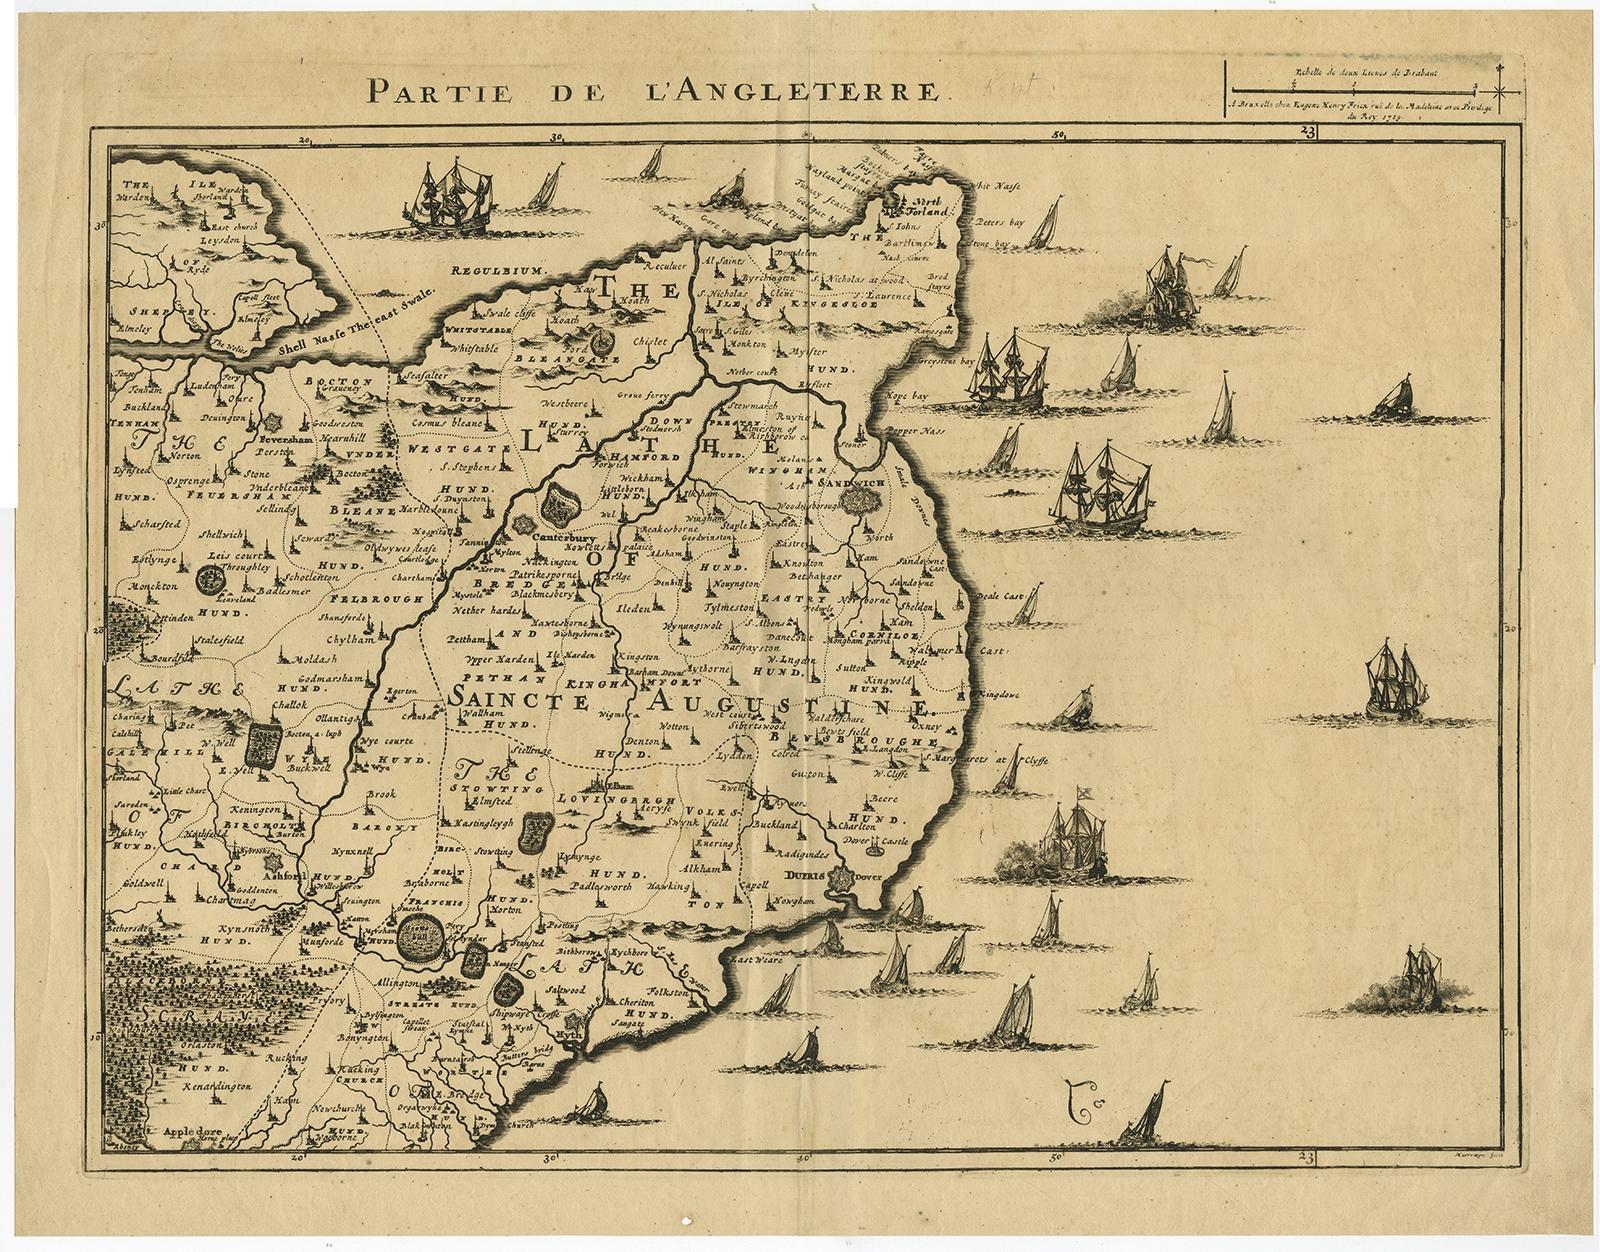 Antique map titled 'Partie de L'Angleterre' Uncommon map of the English Channel coastline with many boats on the sea. Source unknown, to be determined.

Artists and Engravers: Made by 'Jacobus Harrewijn' after 'Henry Fricx'. Jacobus Harrewijn